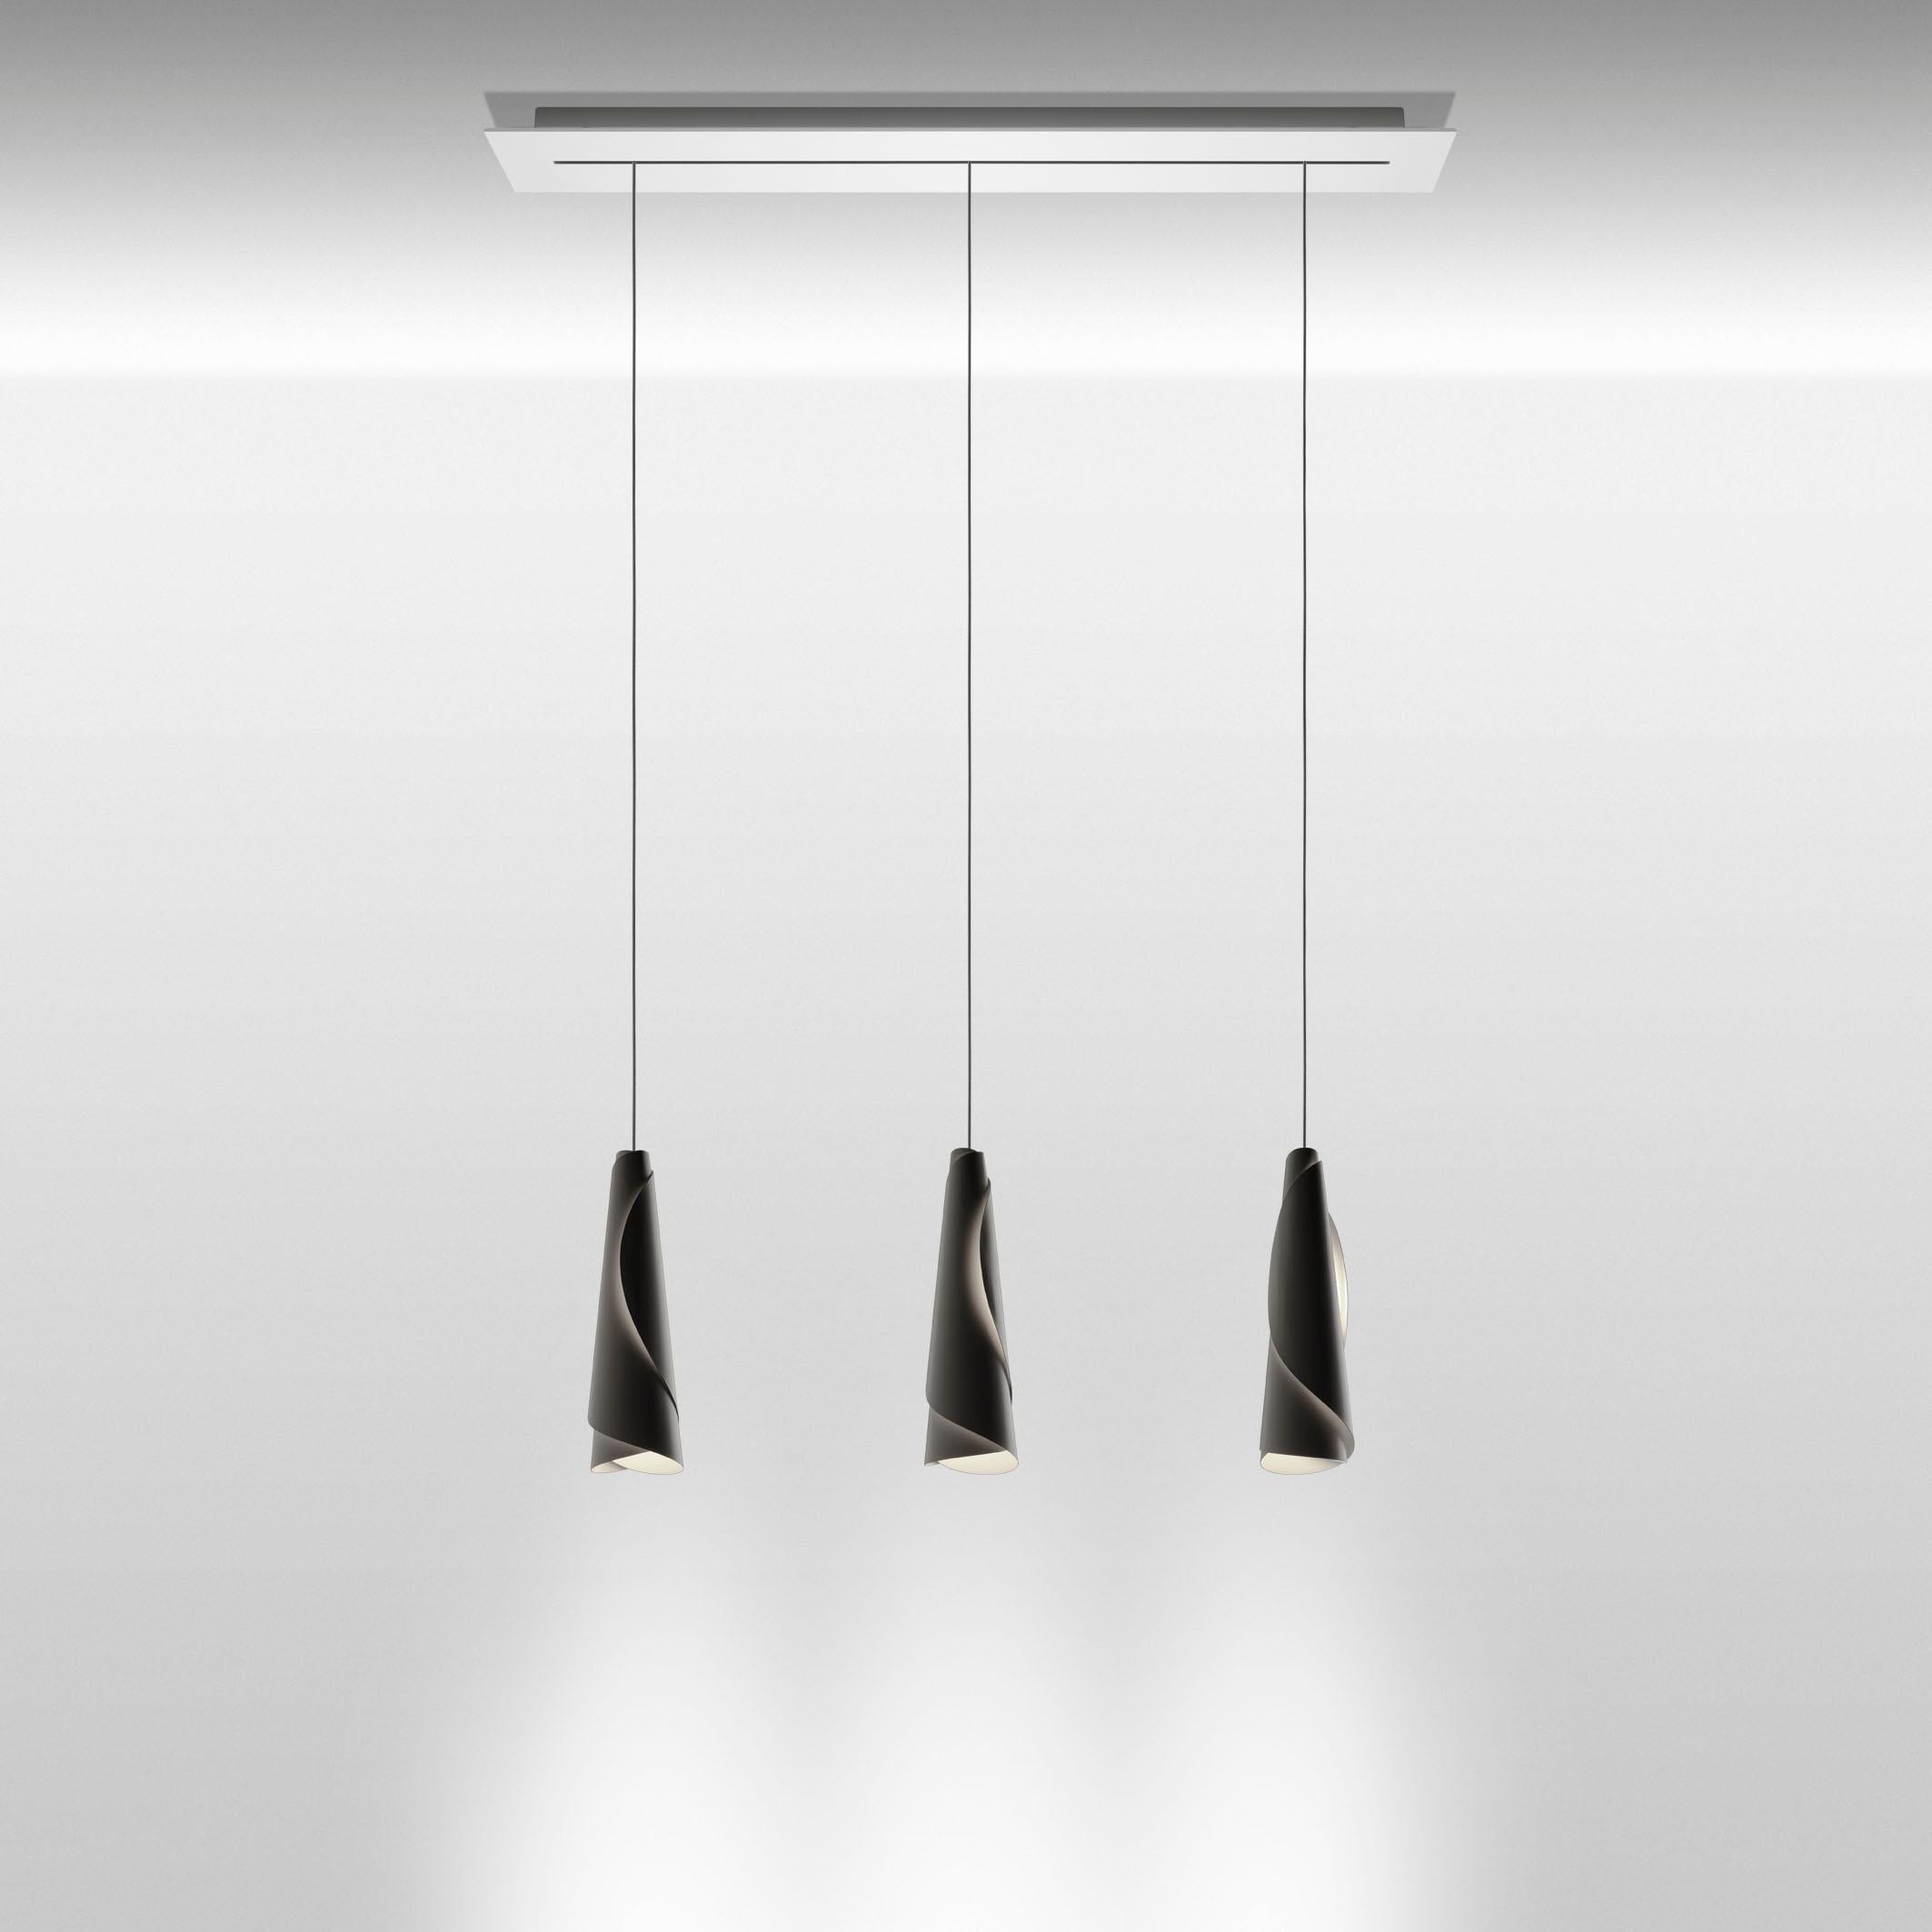 Suspension lamp with direct light. Diffuser consisting of two laser-cut aluminum sheets, which are rolled up and slipped into one another. The engravings on the diffusers let the light out, to delineate the contours of the two sheets with a glow of